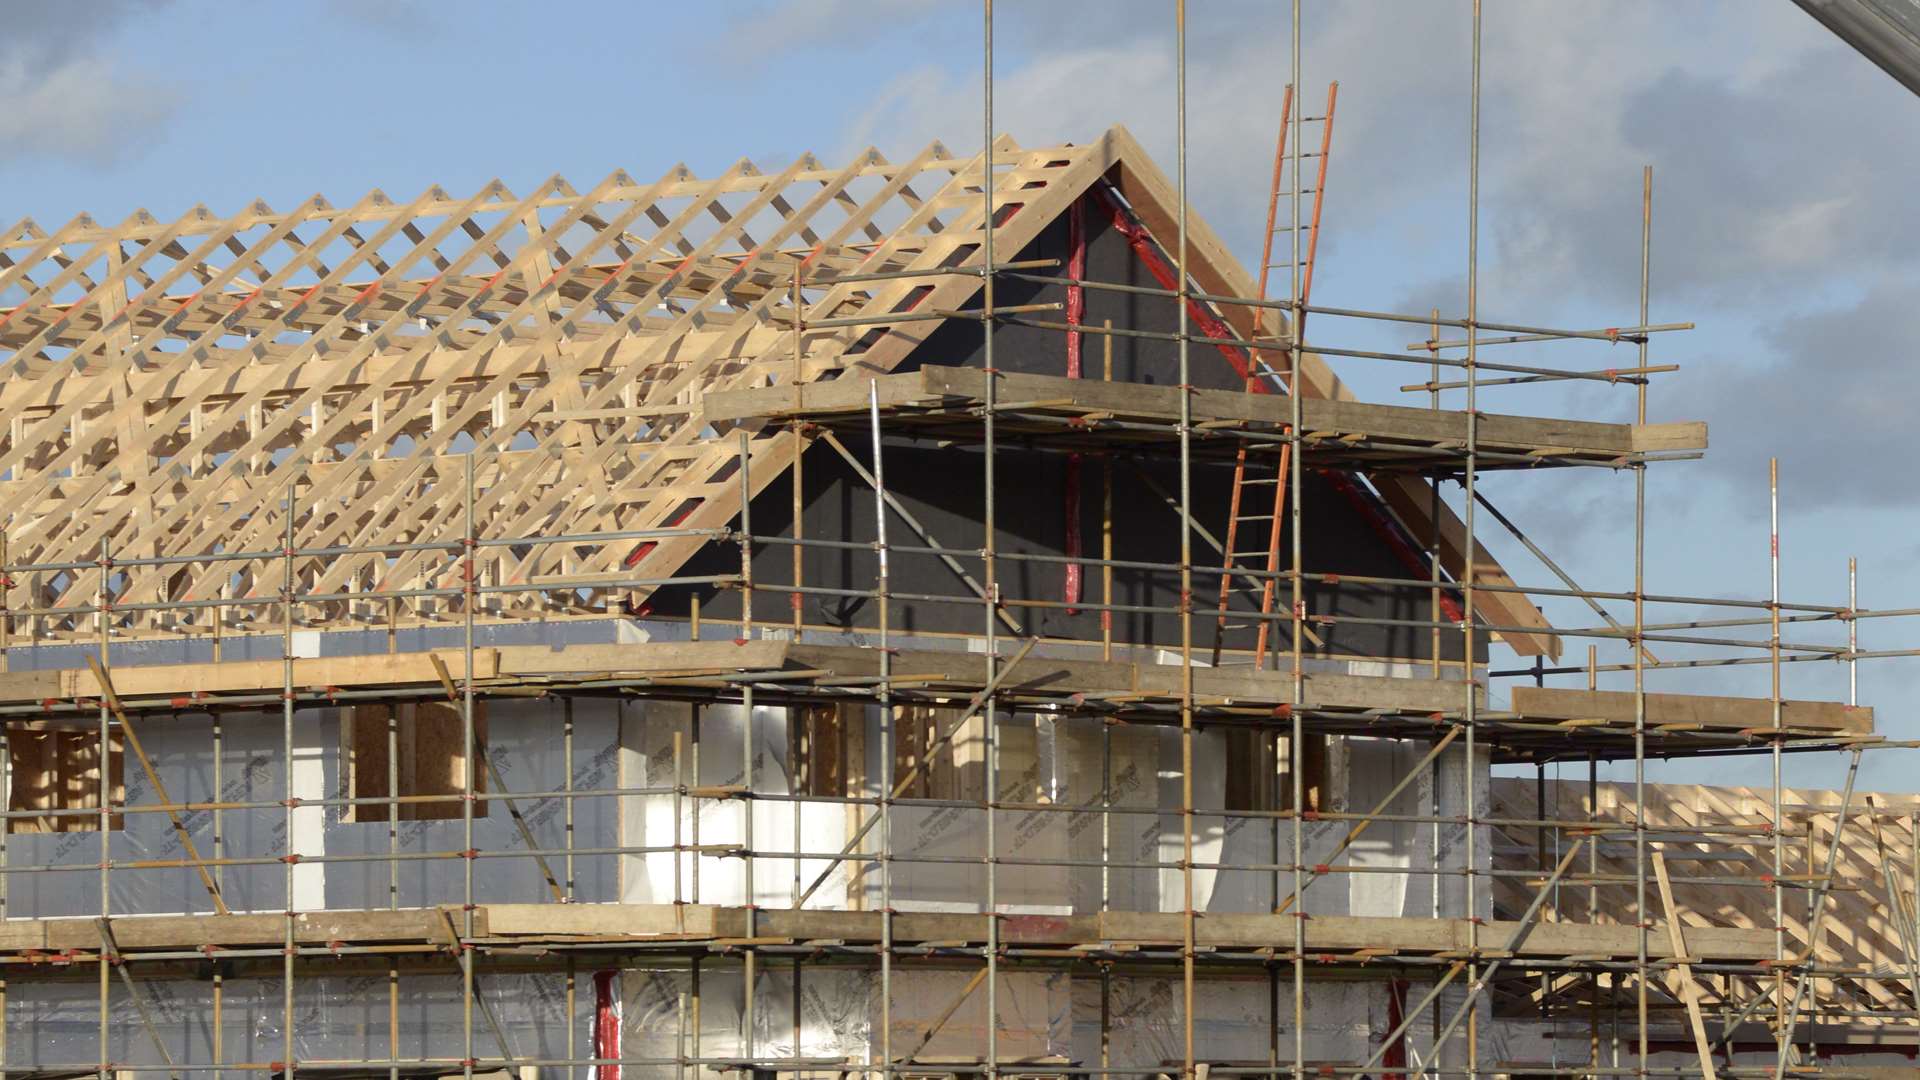 Roe Timberframe manufactures, supplies and installs timber frames, brickwork, floor joists, roof trusses and staircases